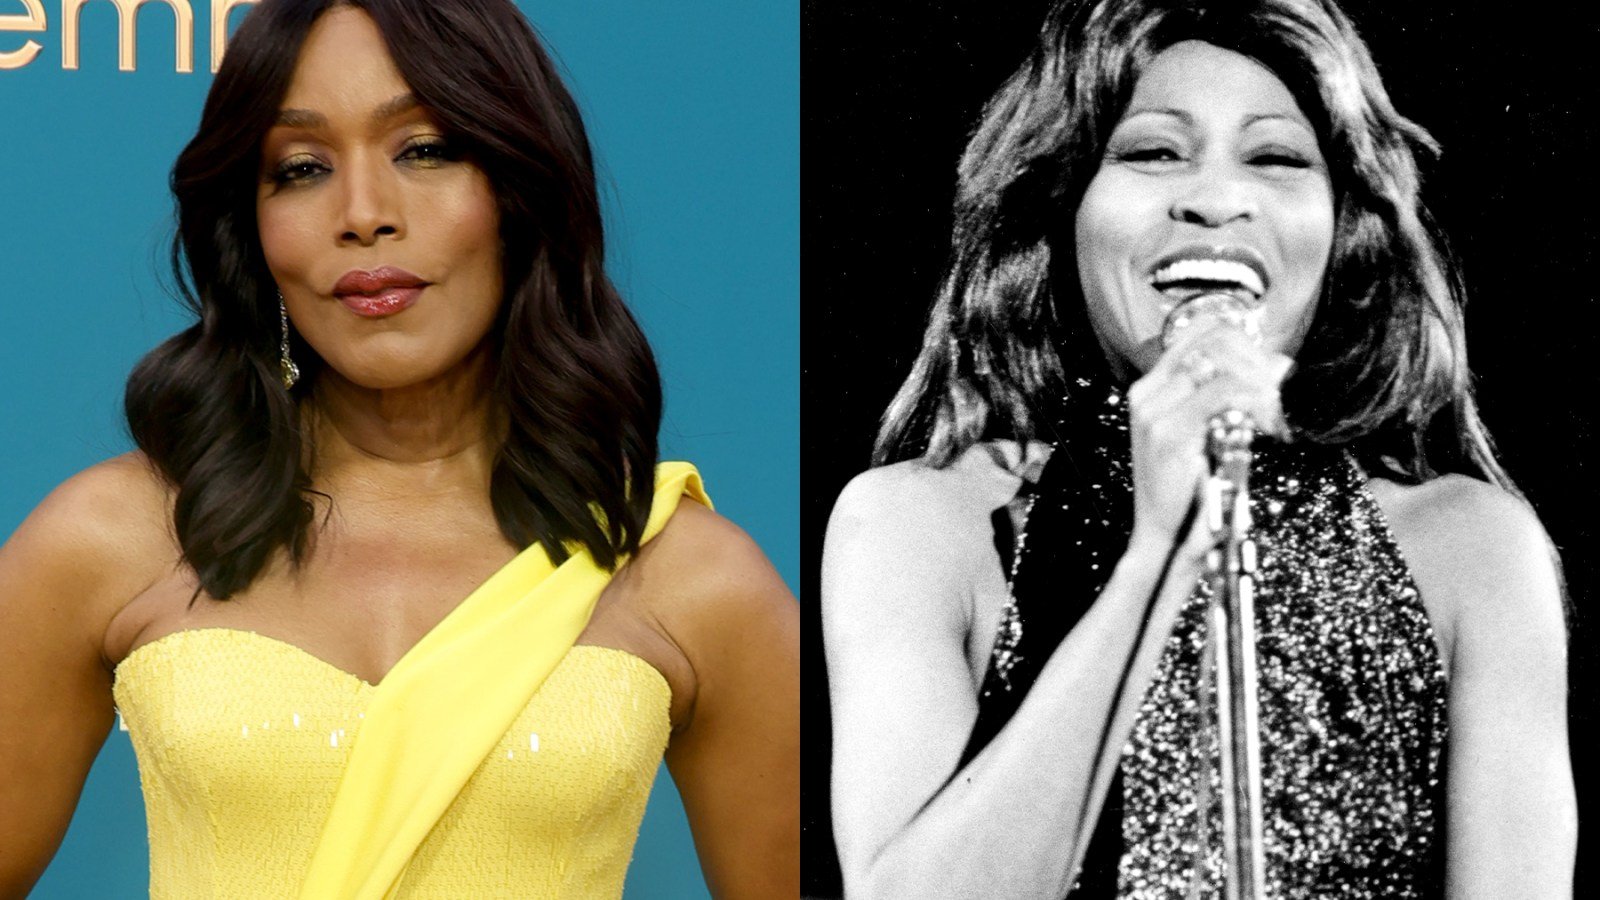 Angela Bassett: 'Tina Turner Showed Others What Love and Freedom Should Look Like'